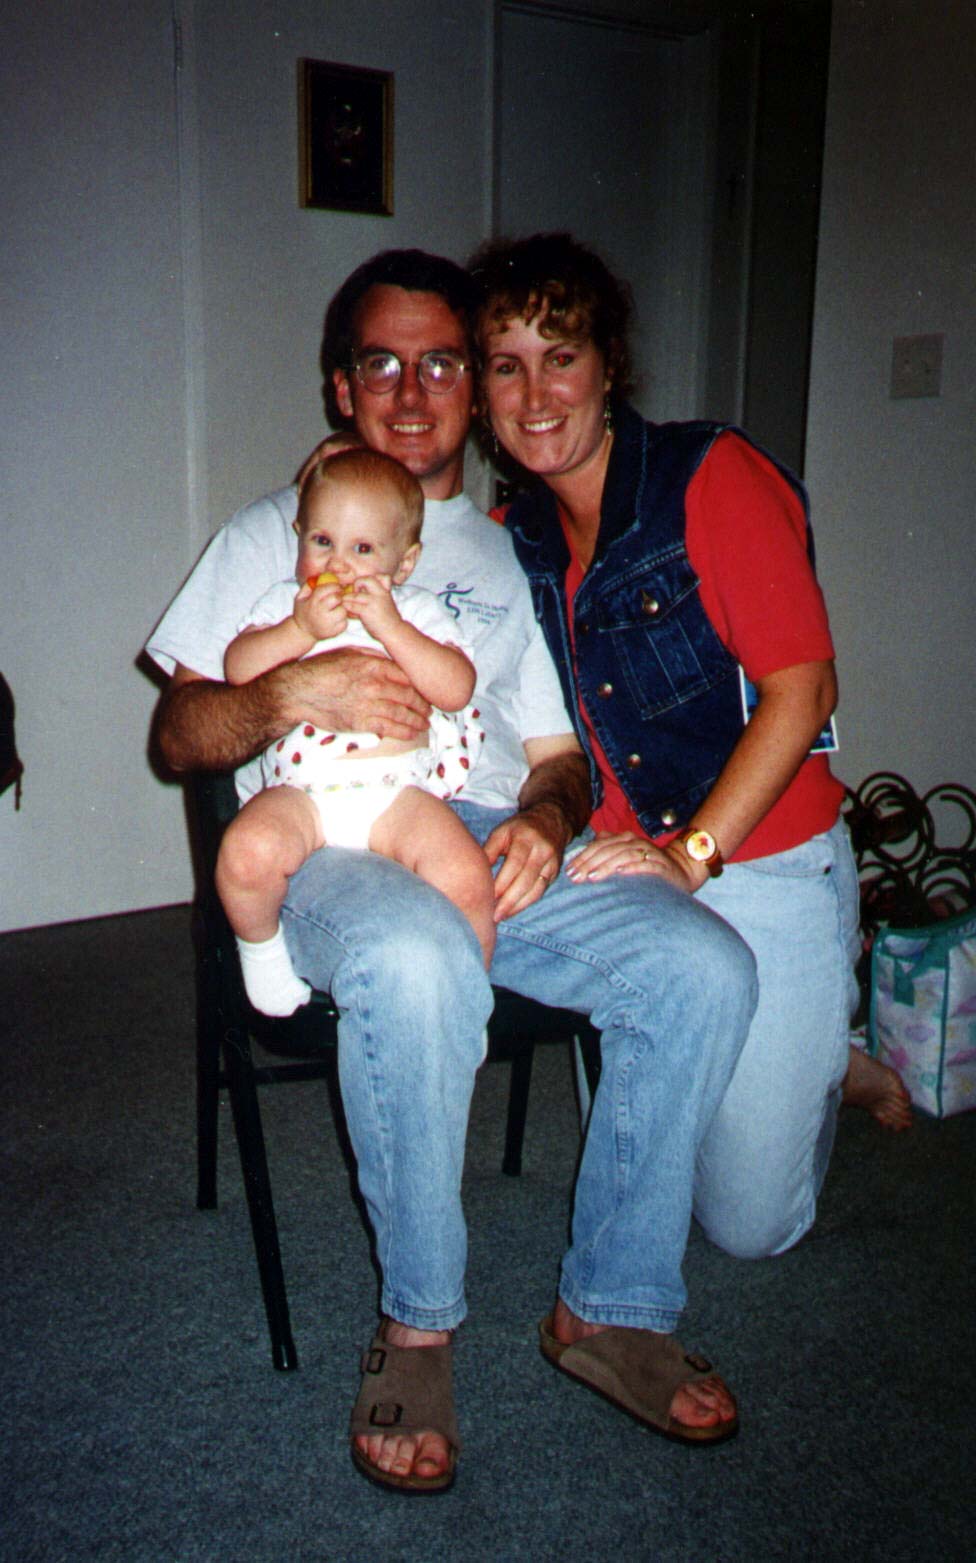 The two of us with our niece, Courtney